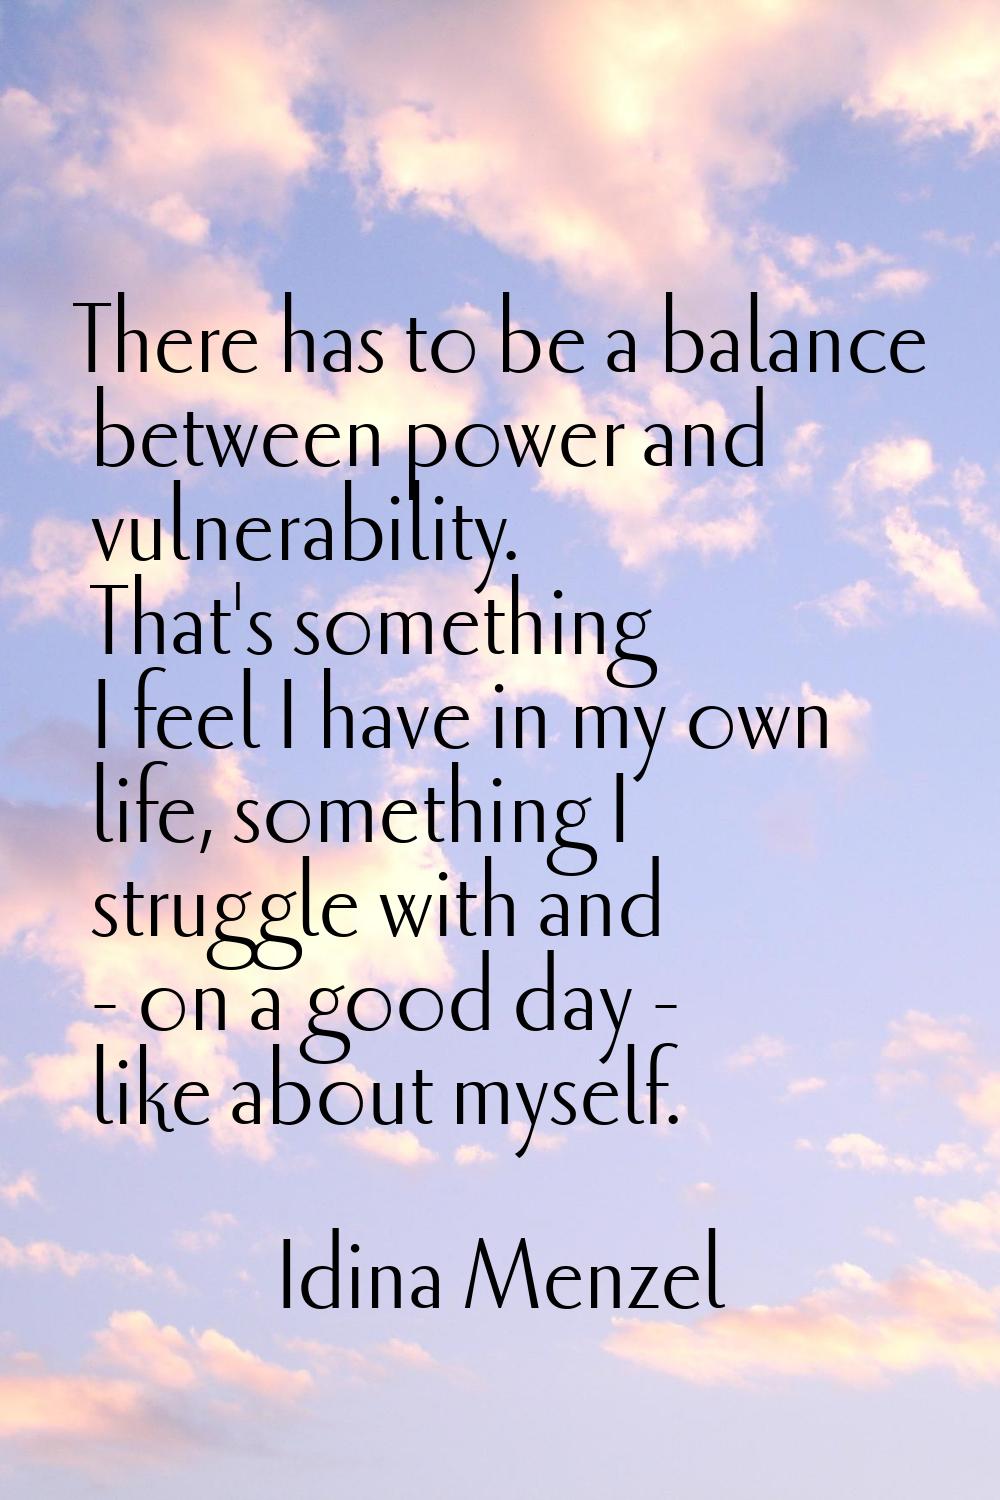 There has to be a balance between power and vulnerability. That's something I feel I have in my own